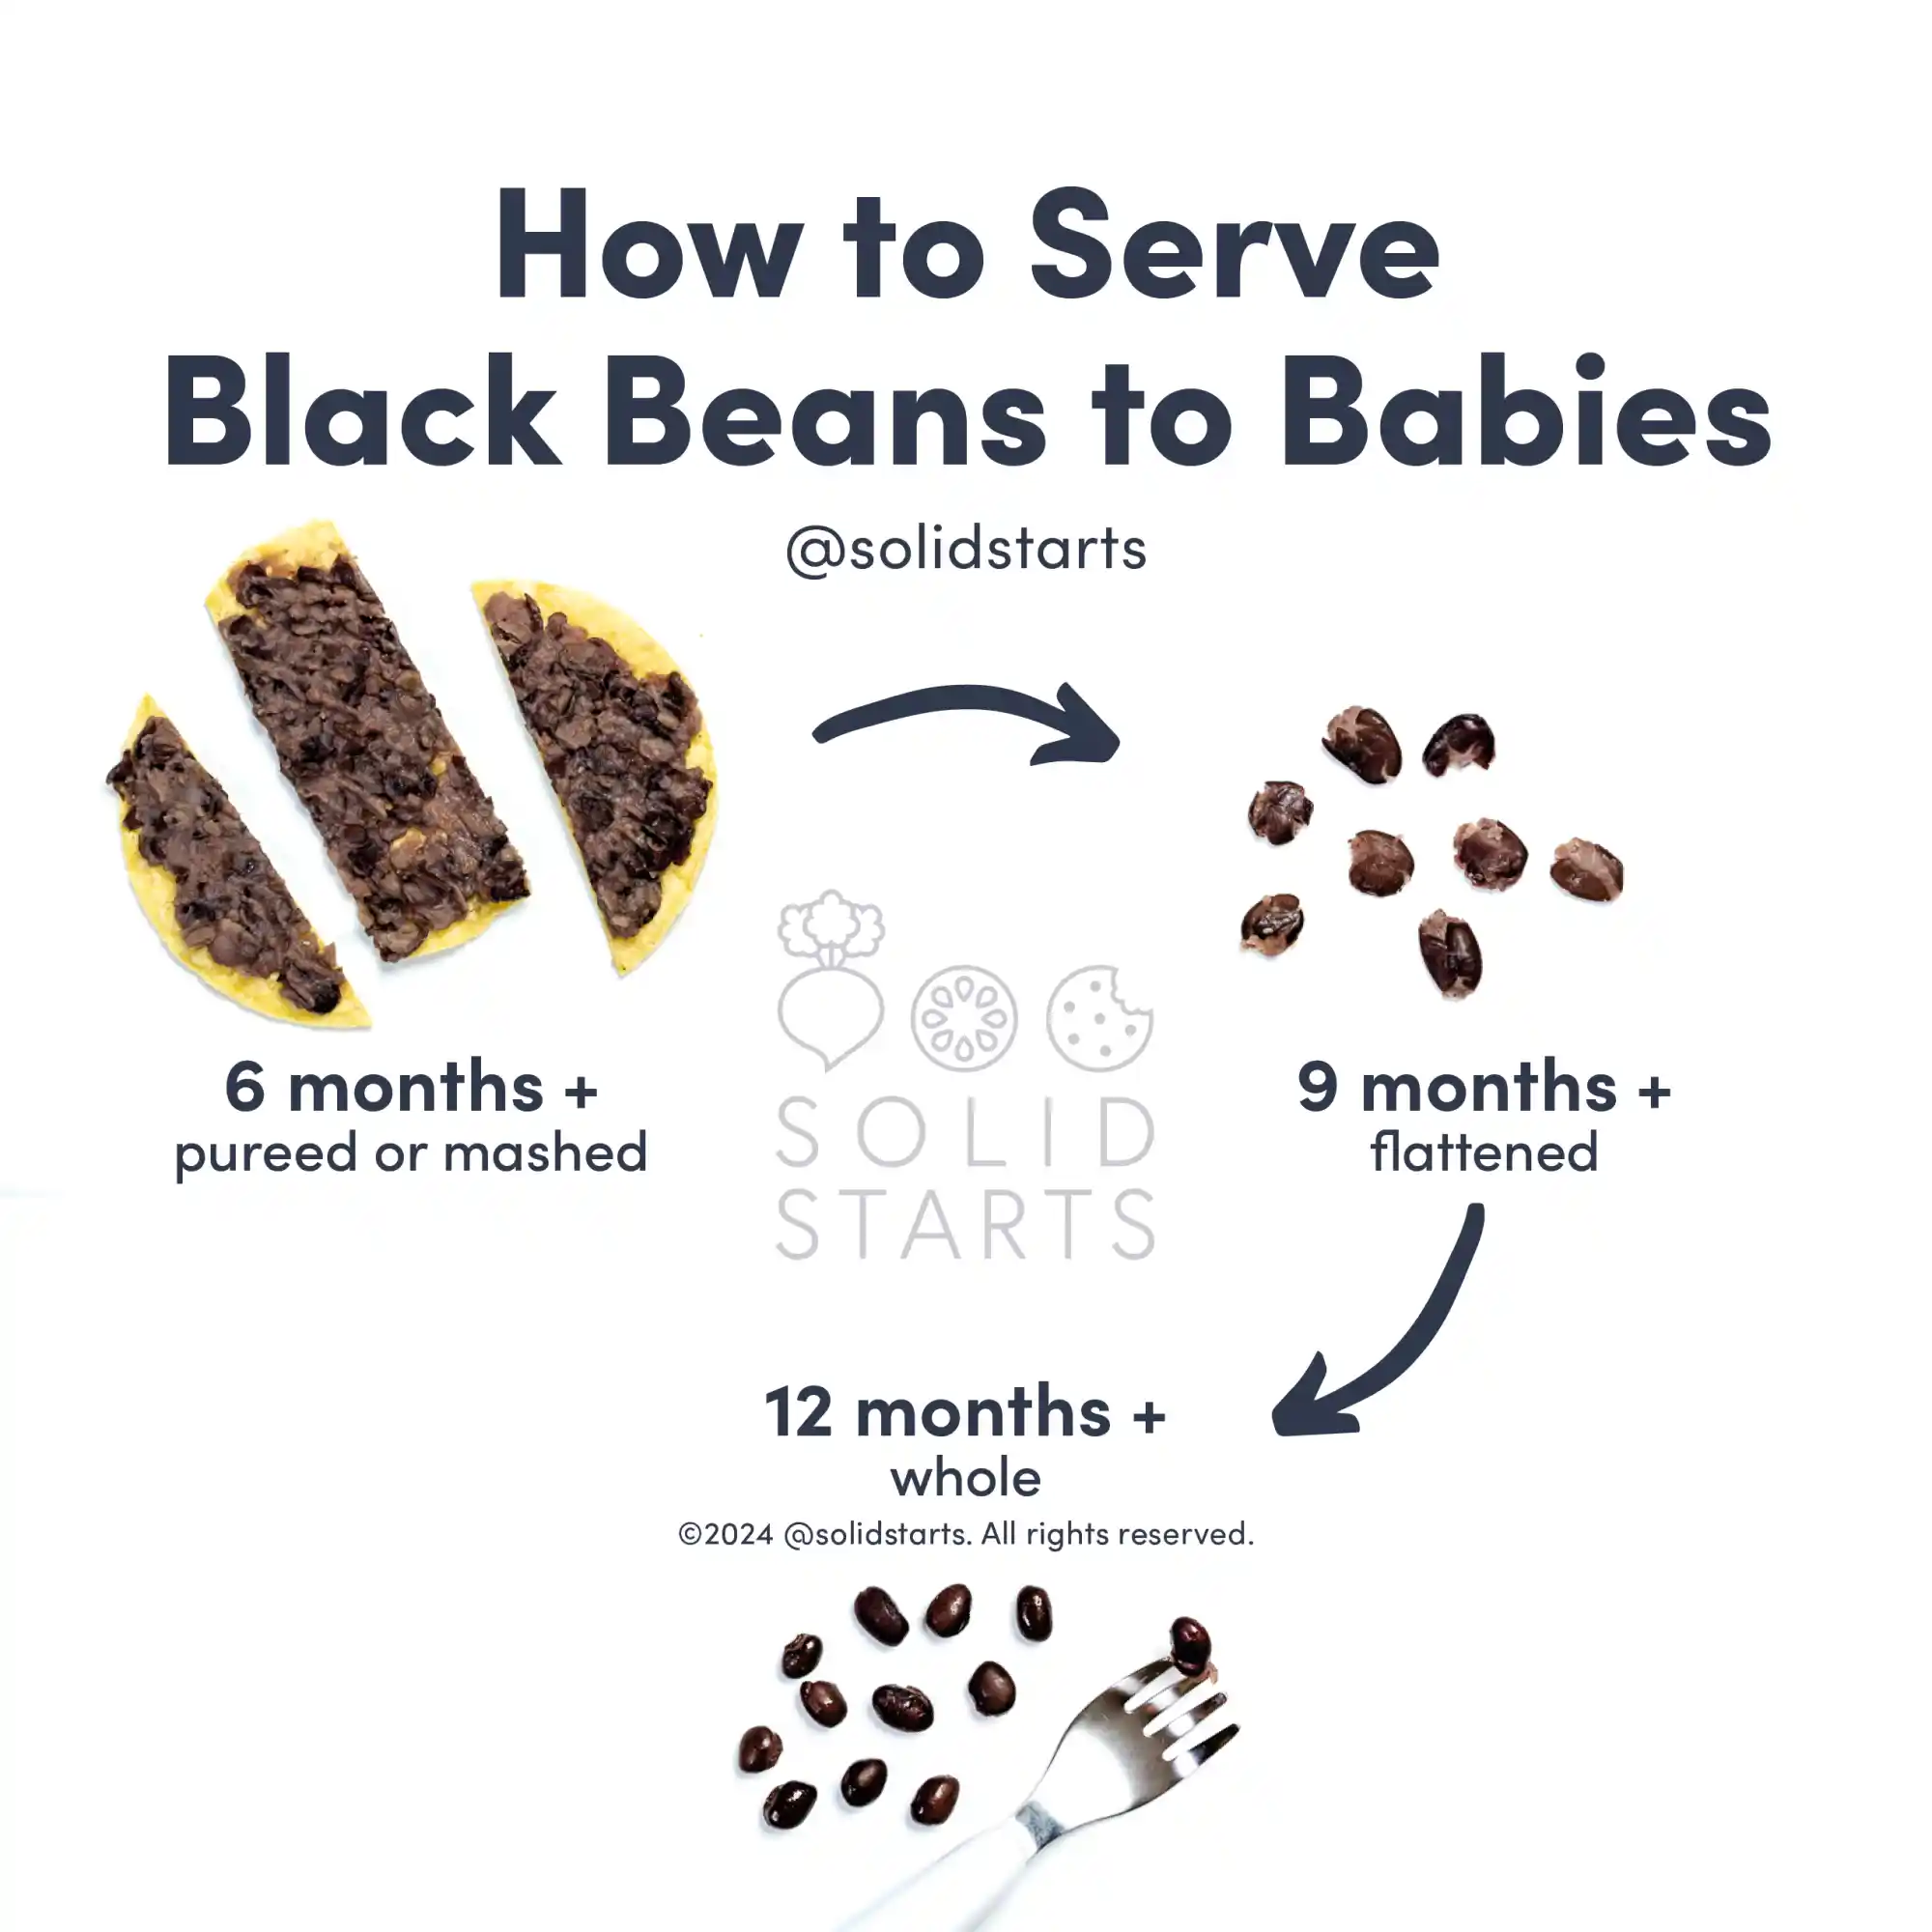 a Solid Starts infographic with the header How to Serve Black Beans to Babies: mashed or pureed for 6 months+, flattened for 9 months+, and whole for 12 months+